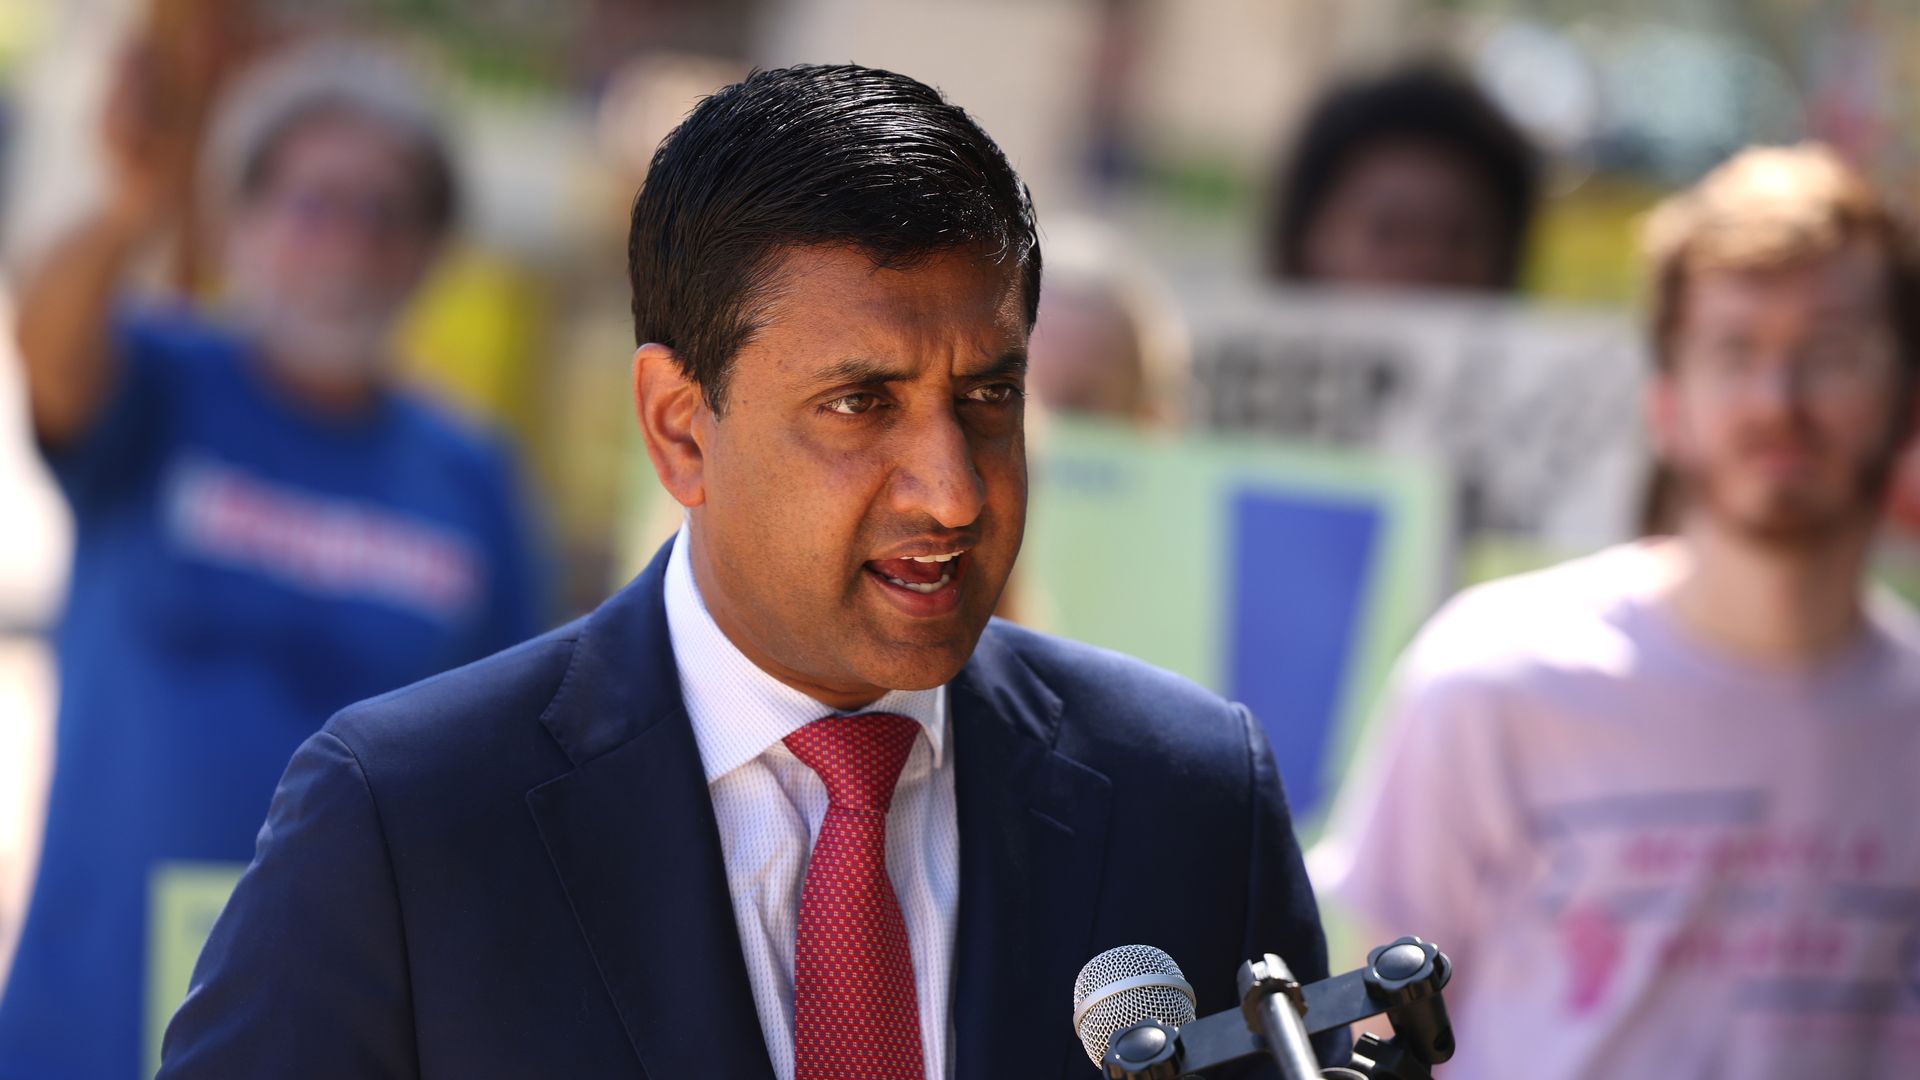 Rep. Ro Khanna (D-CA) speaks at an “End Fossil Fuel” rally near the U.S. Capitol on June 29, 2021 in Washington, DC